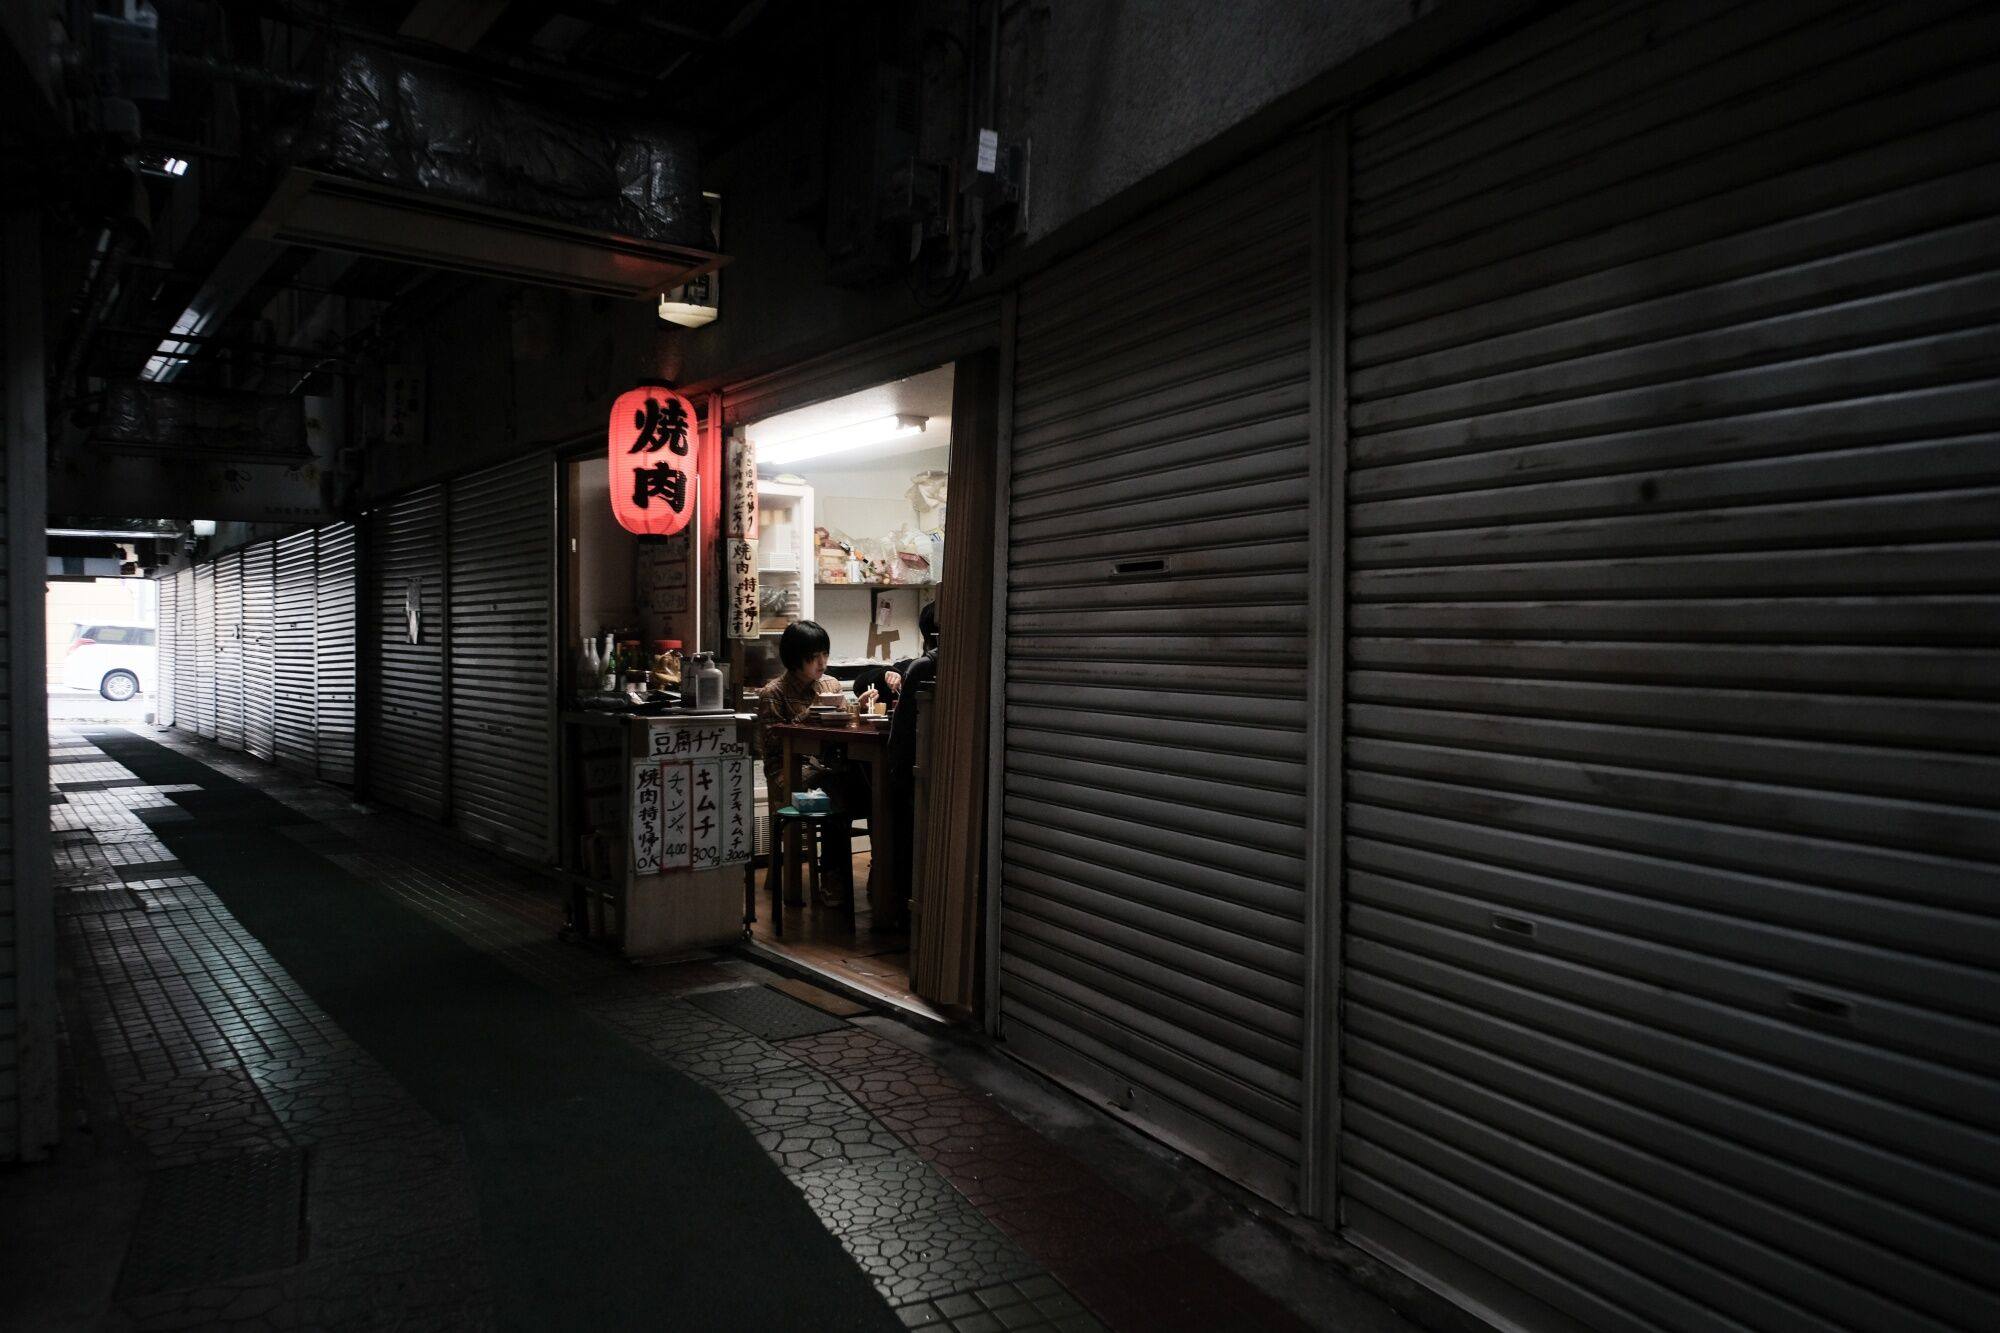 Customers dine at a restaurant in the Chuo Market in Kitakyusyu, Fukuoka, on March 21. Japan’s stagnation has had a profound socioeconomic impact. Photo: Bloomberg